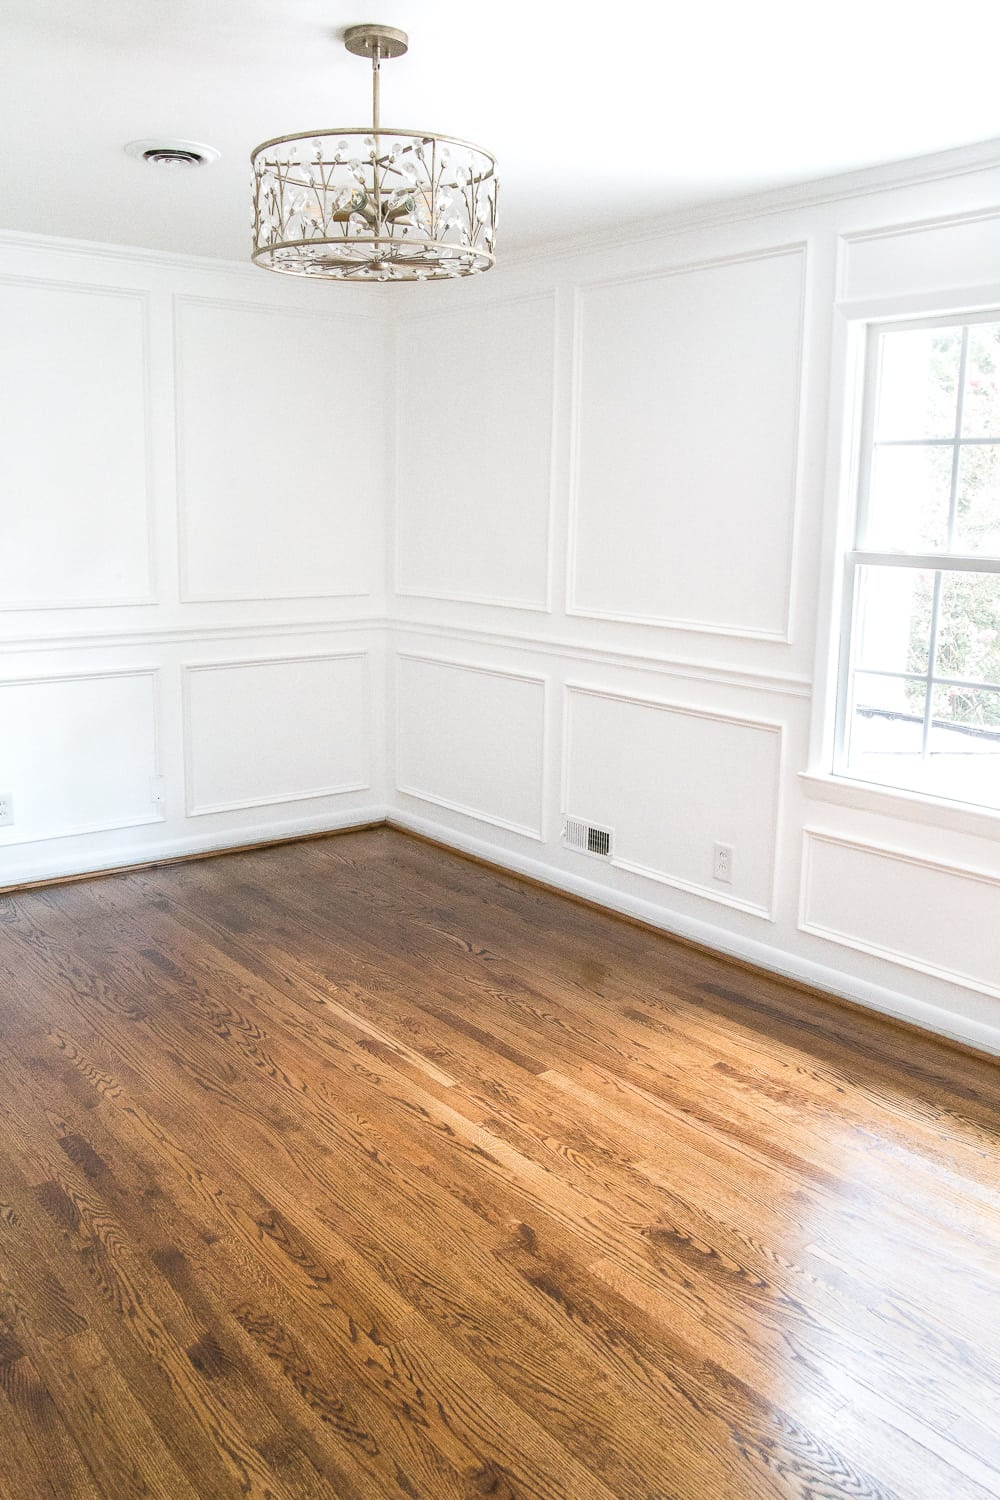 Everything you need to know to refinish hardwood floors | Minwax Provincial Stain sealed with Minwax Fast-Drying Satin Polyurethane